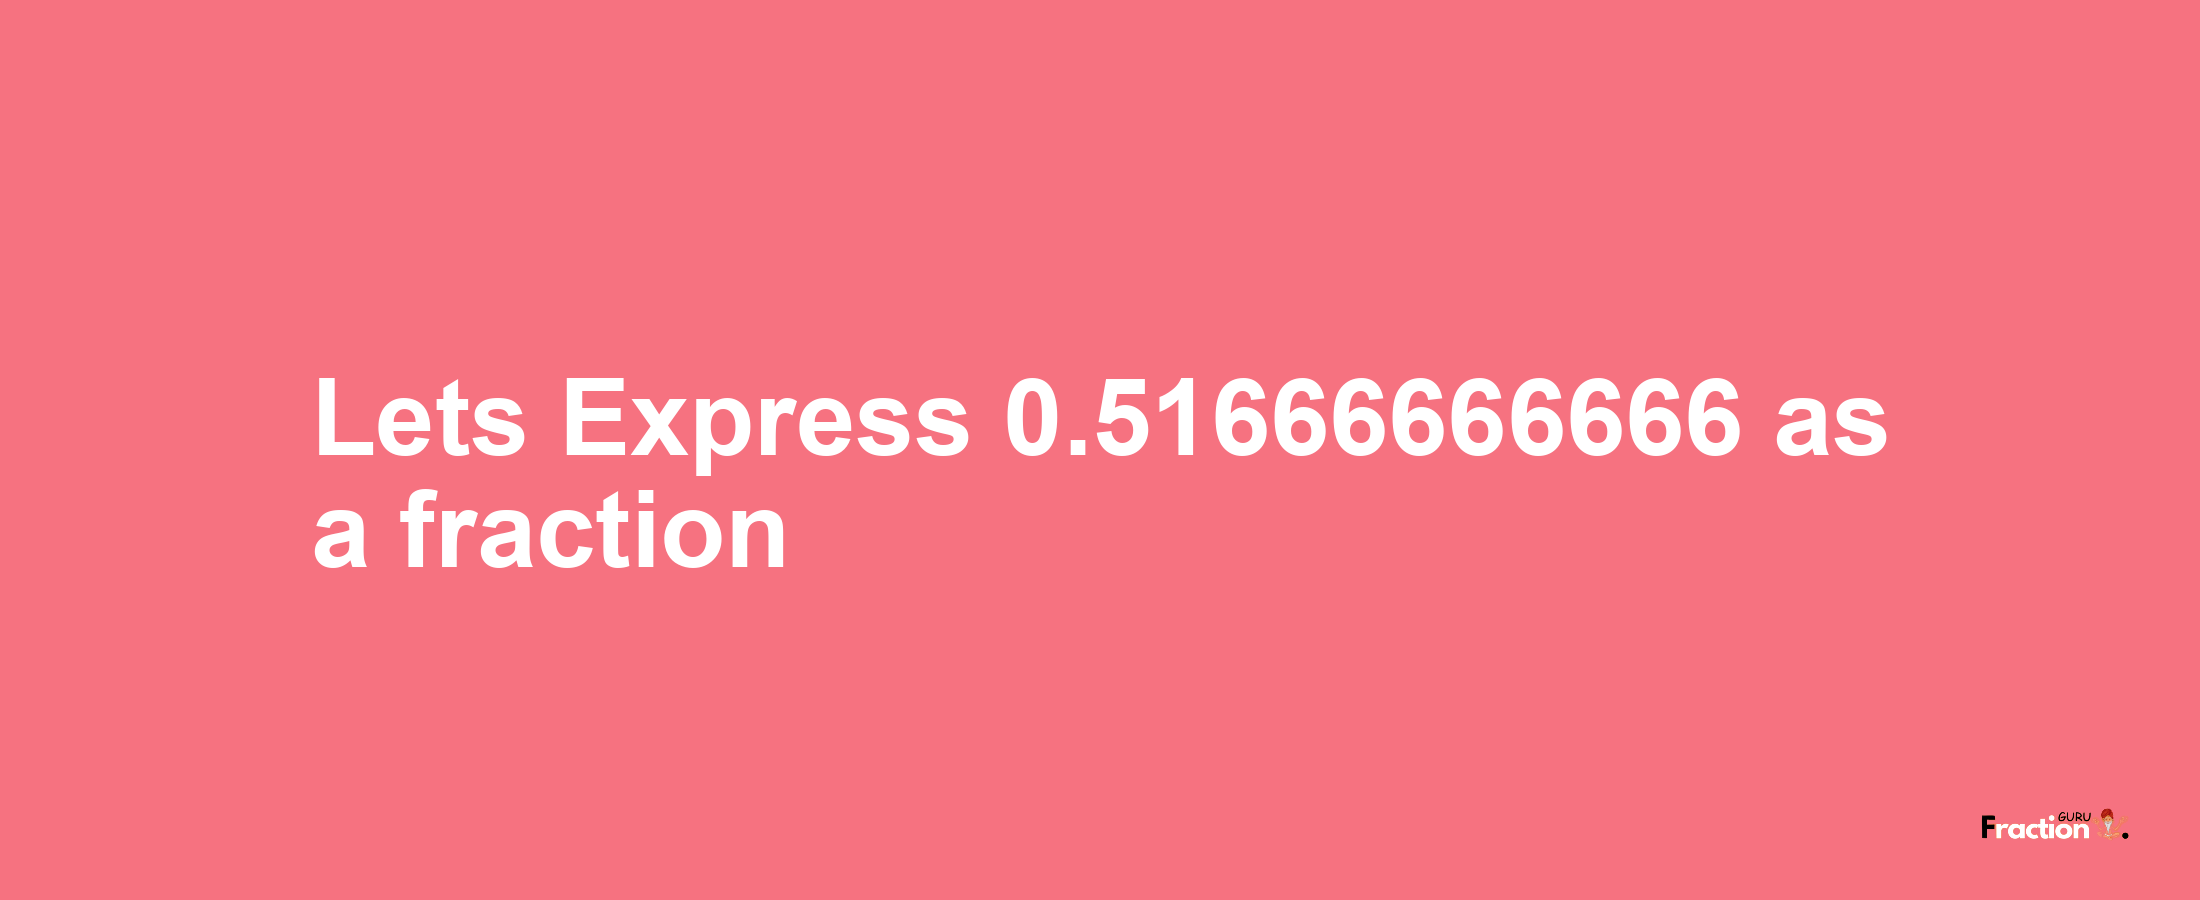 Lets Express 0.51666666666 as afraction